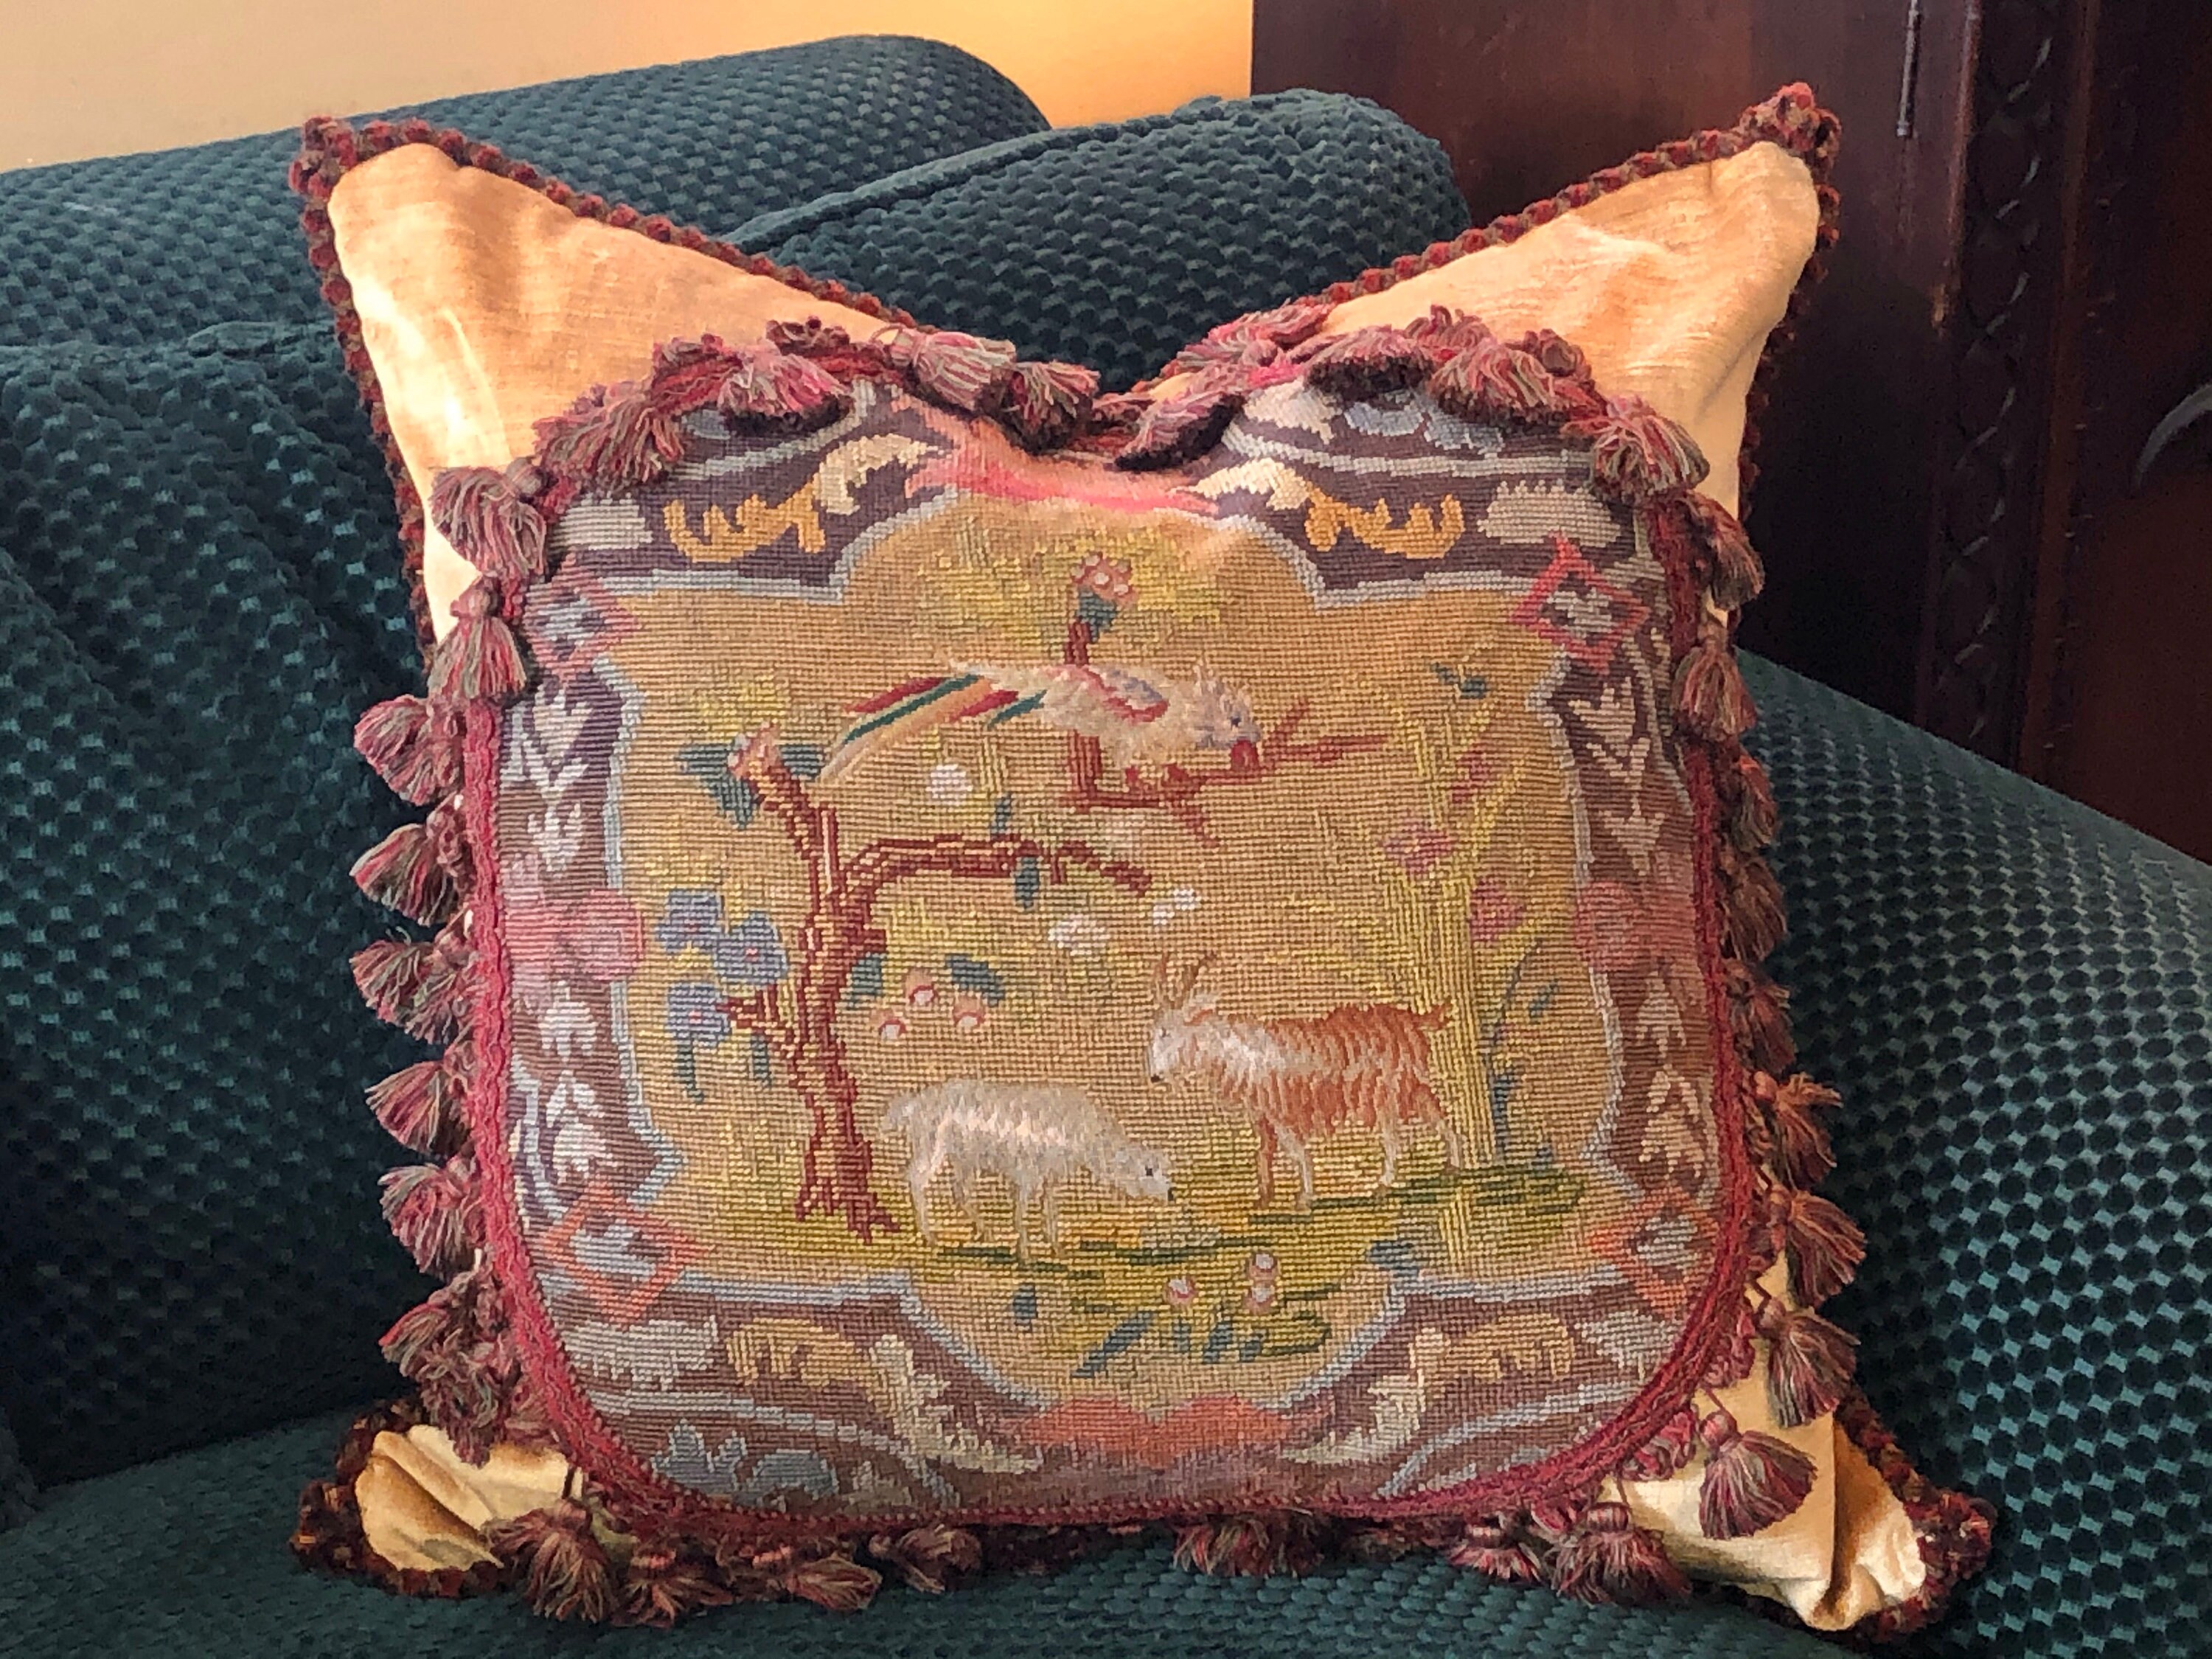 TAPESTRY #1 NEEDLEPOINT PILLOW 16 X 20